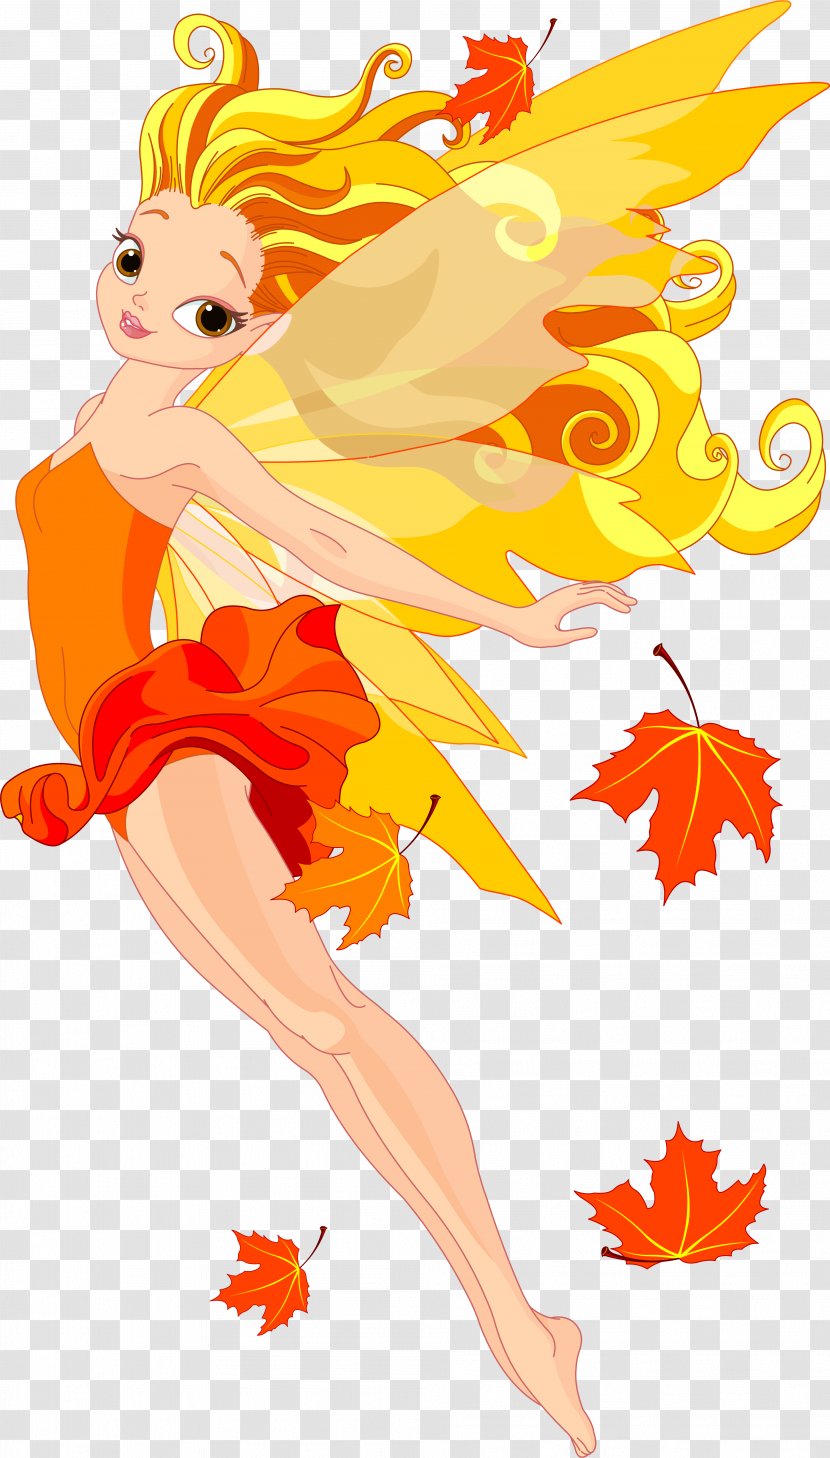 Royalty-free Fairy Clip Art - Frame Transparent PNG